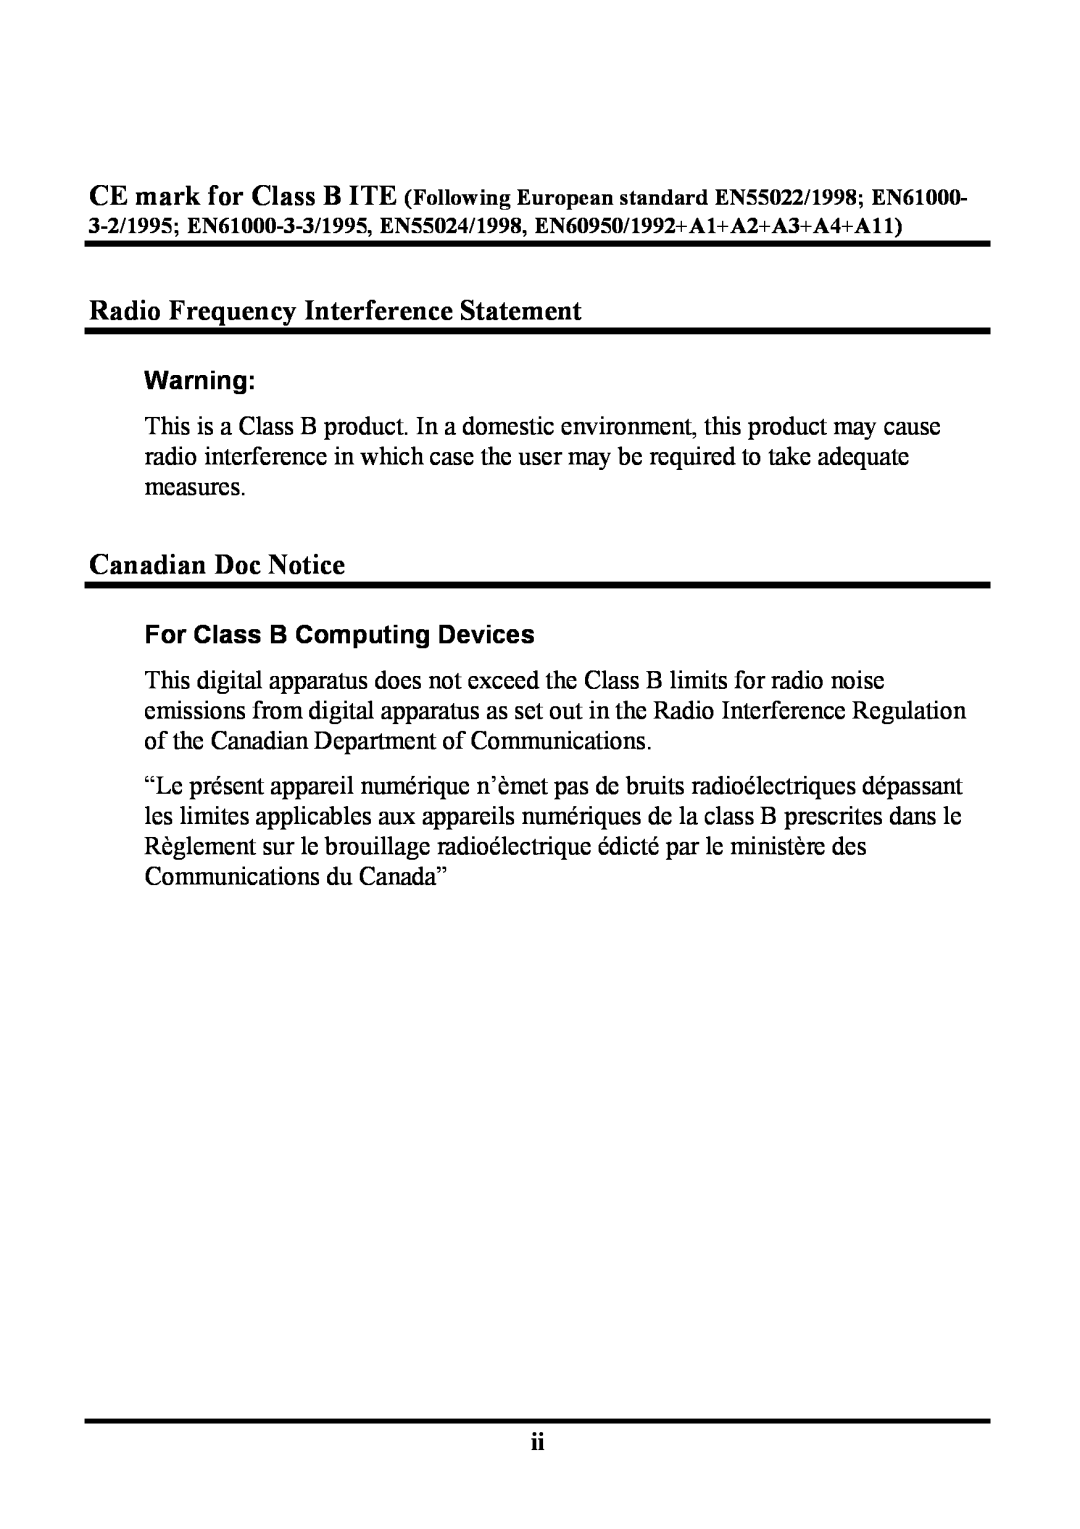 Planar PE191M manual Radio Frequency Interference Statement, Canadian Doc Notice, For Class B Computing Devices 